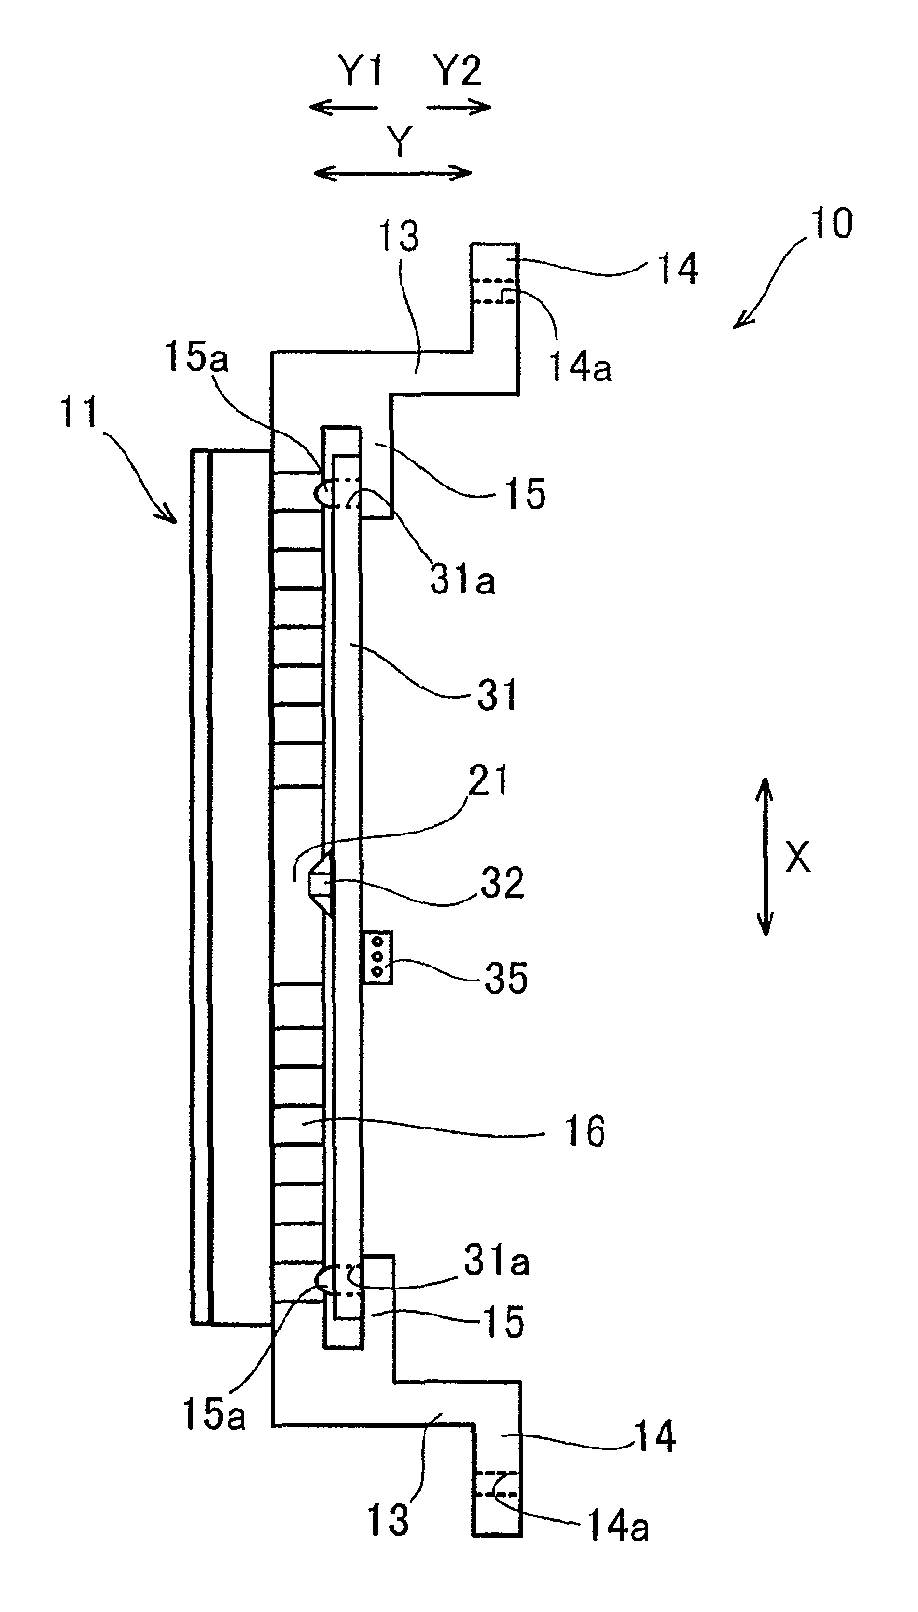 Structure for mounting indicator unit on electronic apparatus